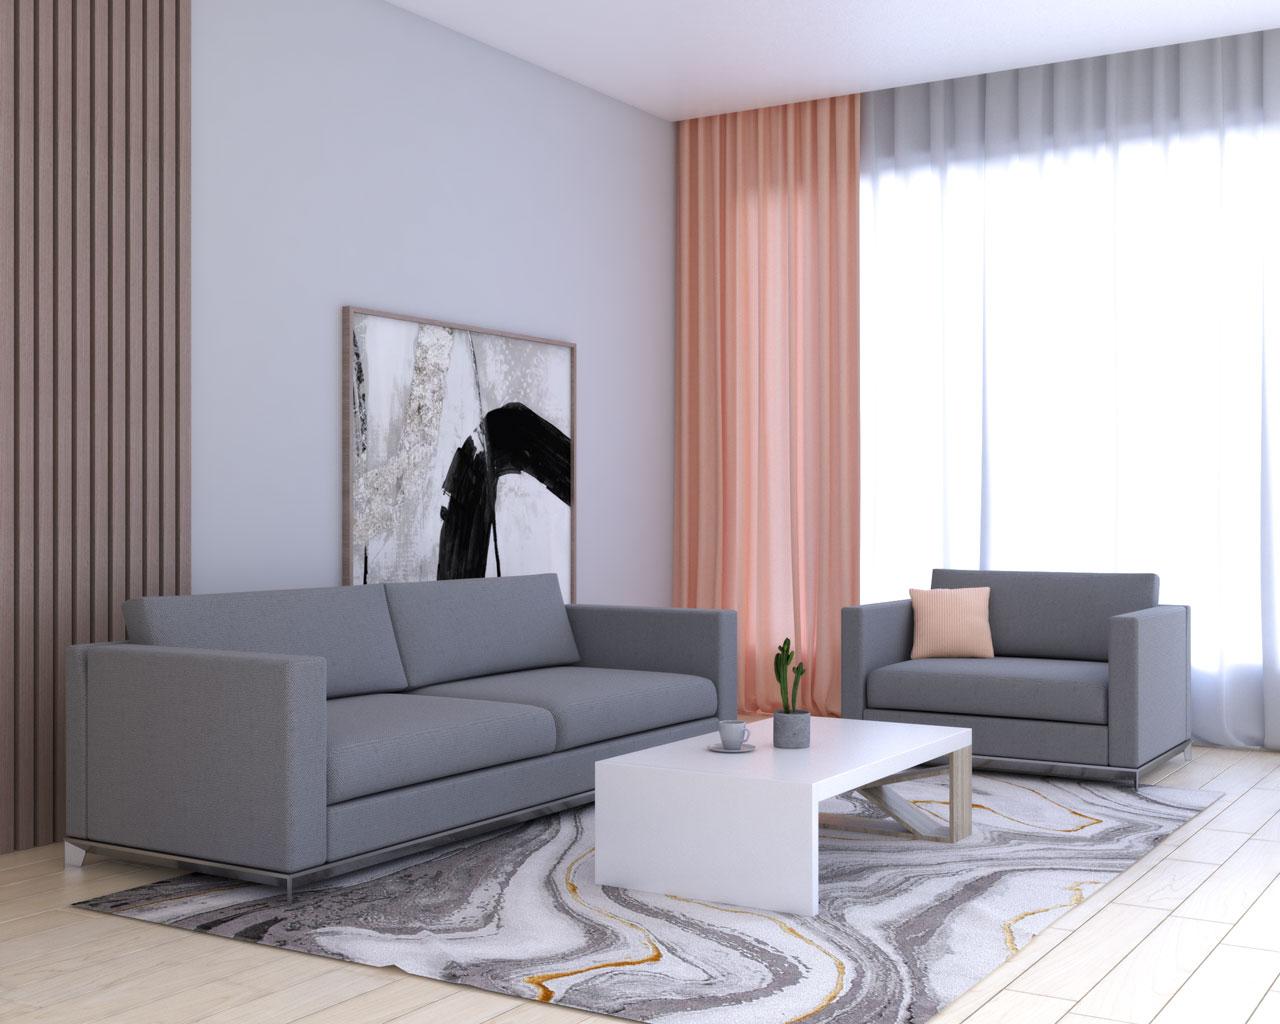 Coral curtains with grey furniture